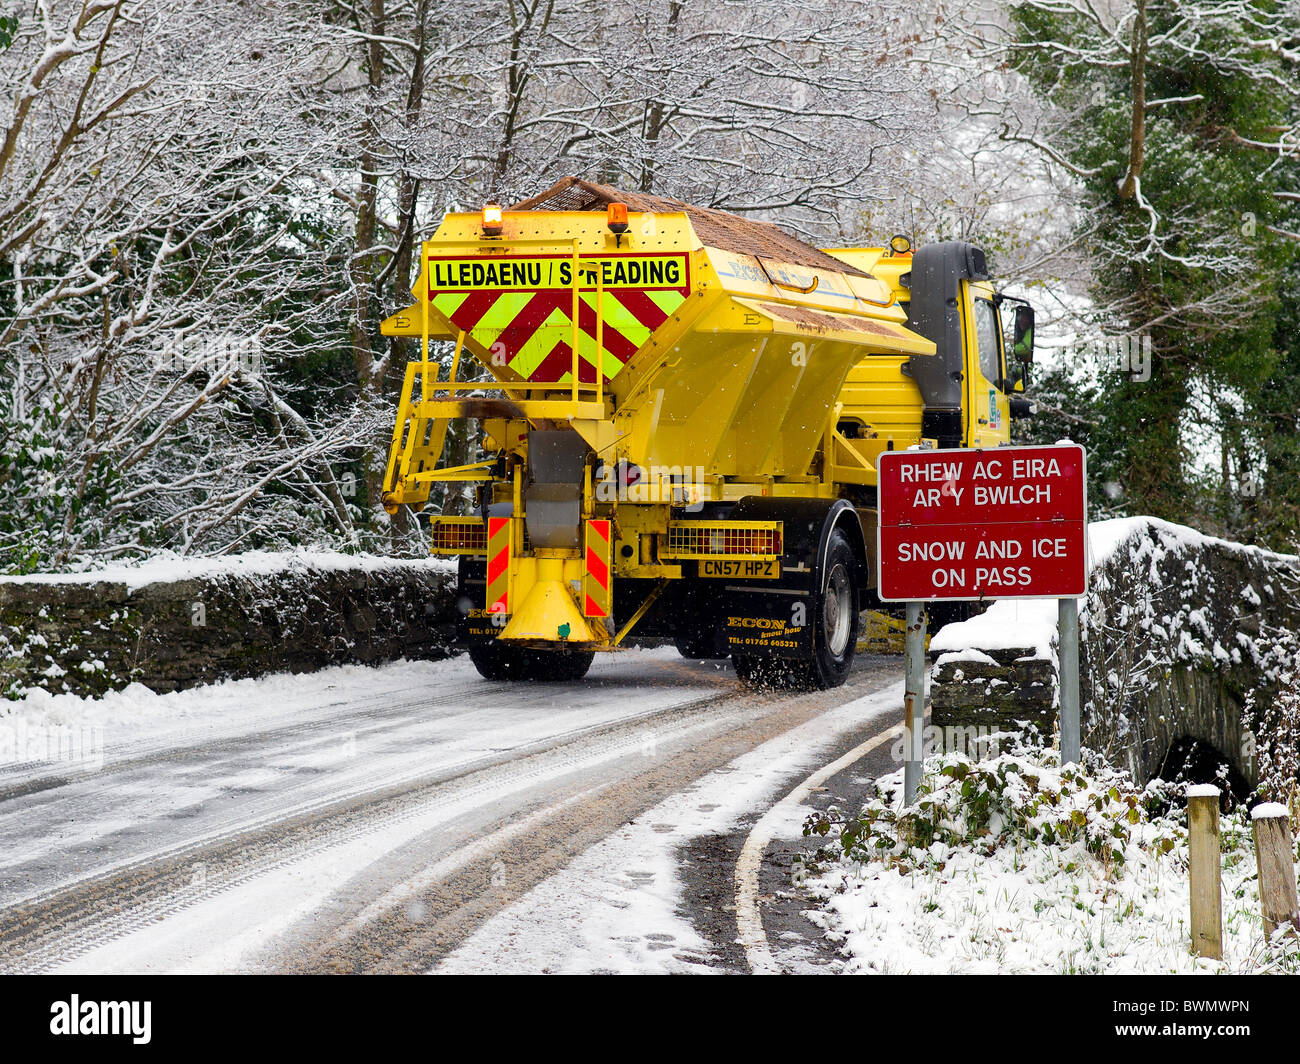 Snow and Ice on Pass road sign, English/Welsh, set in a background of snow covered trees and a gritting snowplough Stock Photo